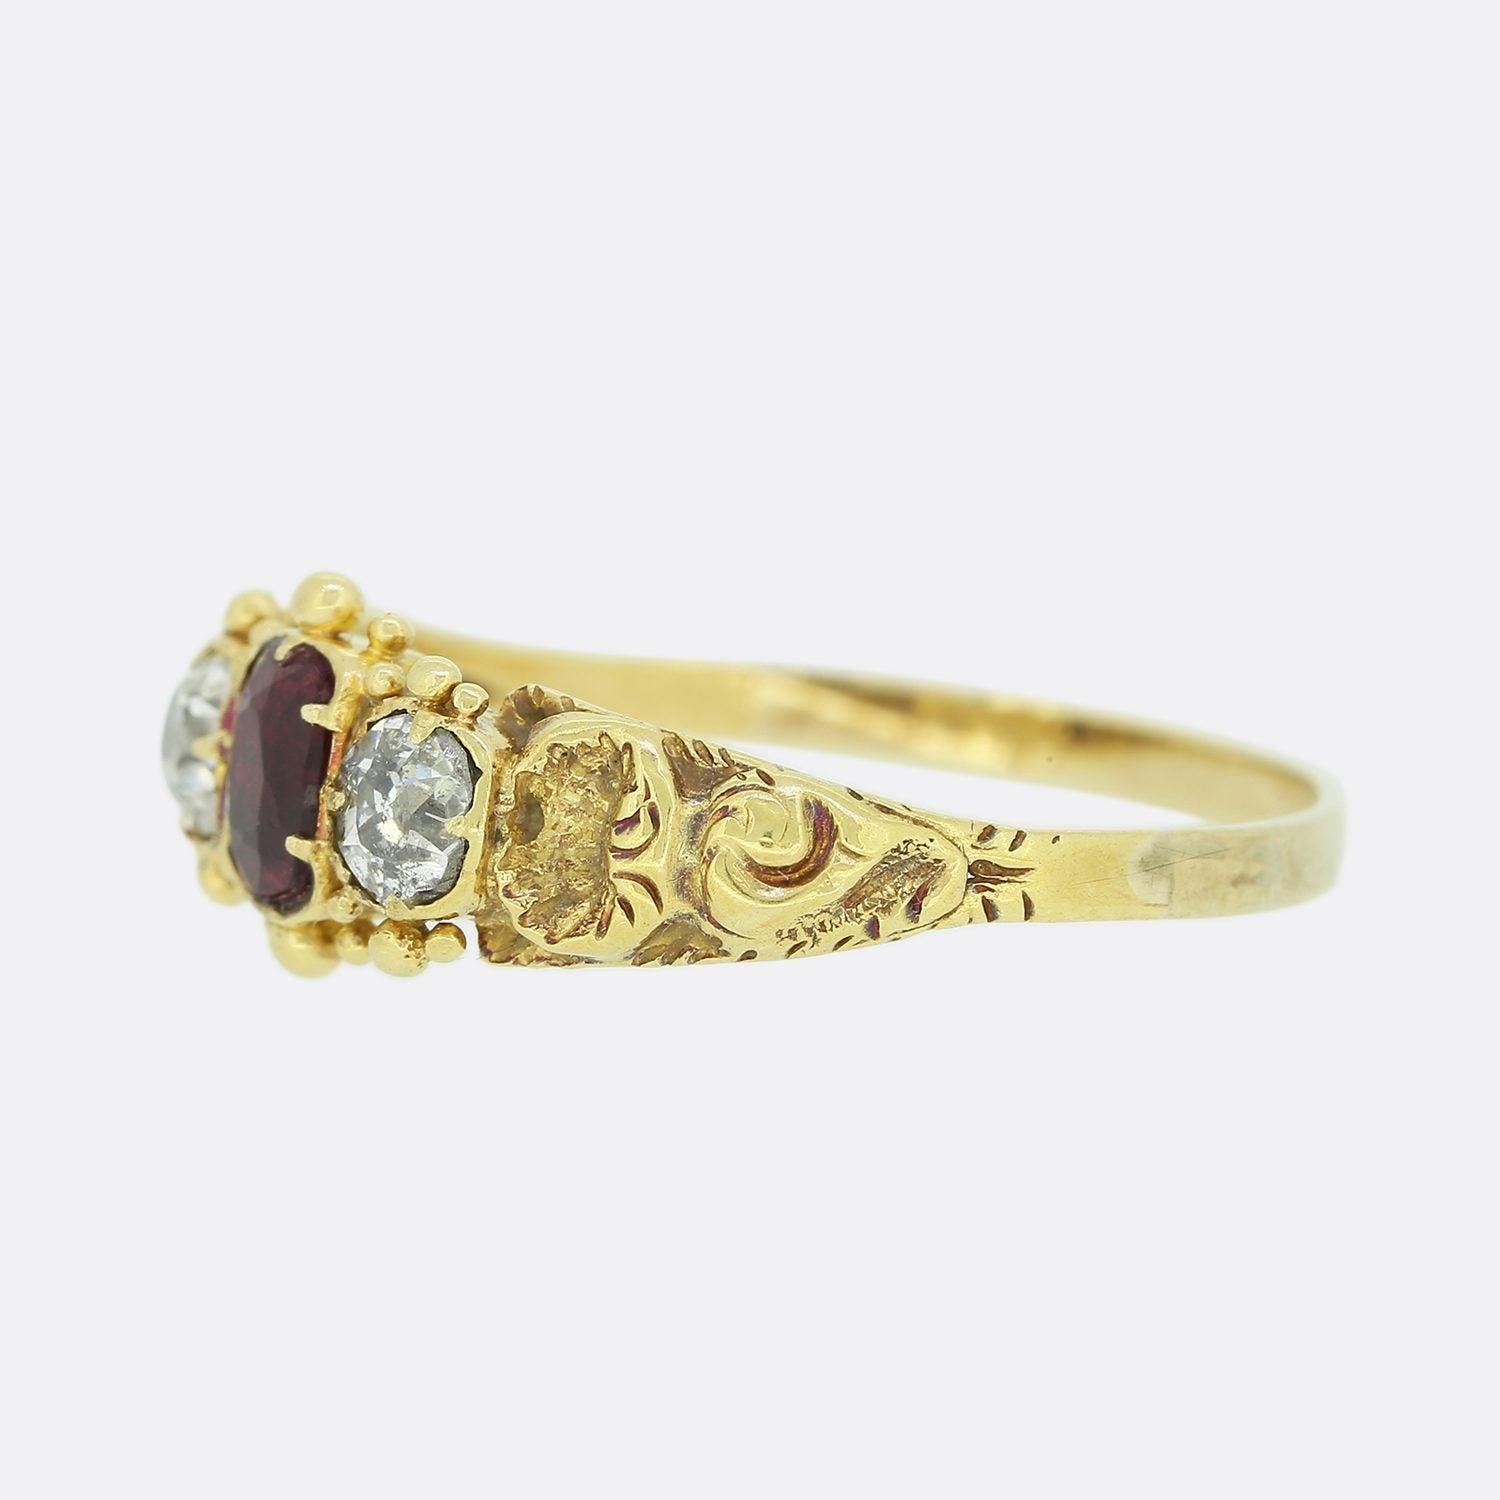 This is a wonderful 15ct yellow gold Georgian ring. The ring features a central rich red ruby with a bright white old cut diamond on each shoulder. The gemstones sit in closed back settings in a typical Georgian style and the ring features wonderful